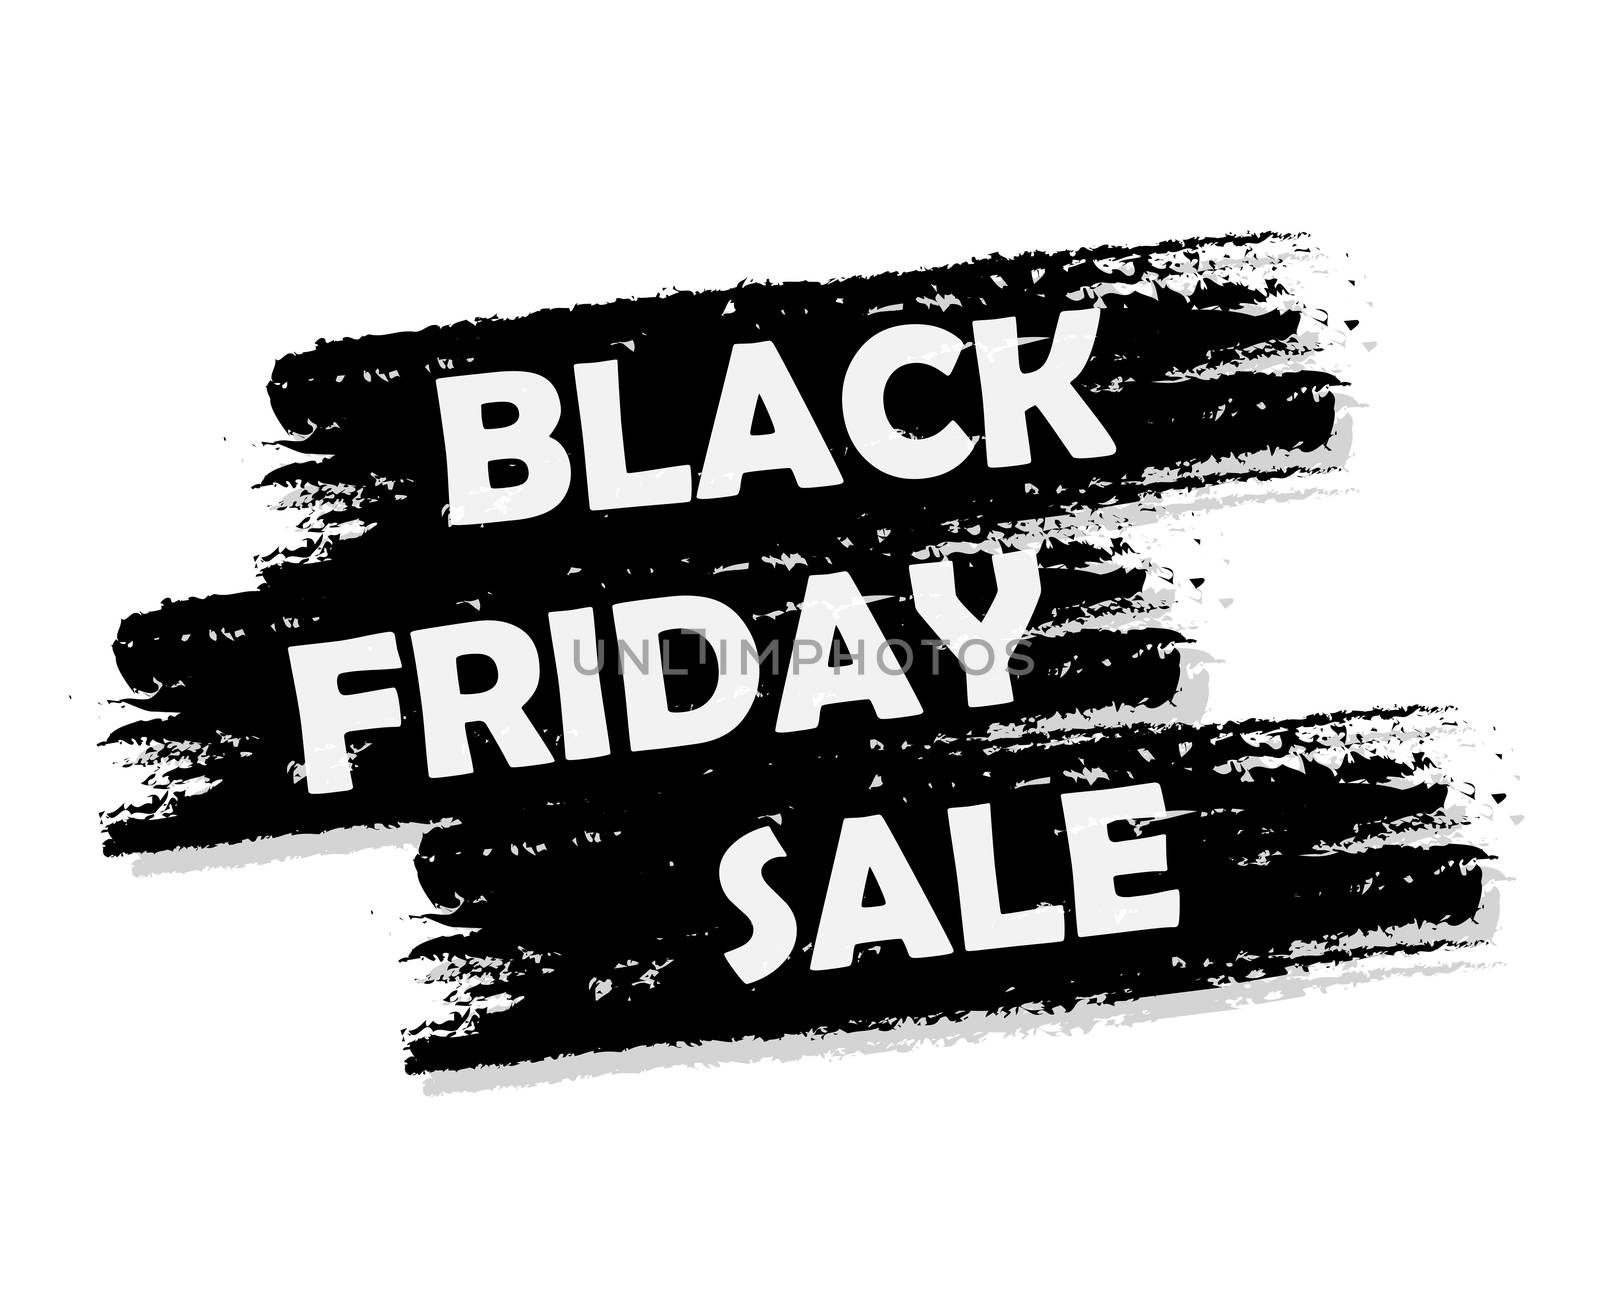 Black friday sale banner - text in black drawn label, business seasonal shopping concept